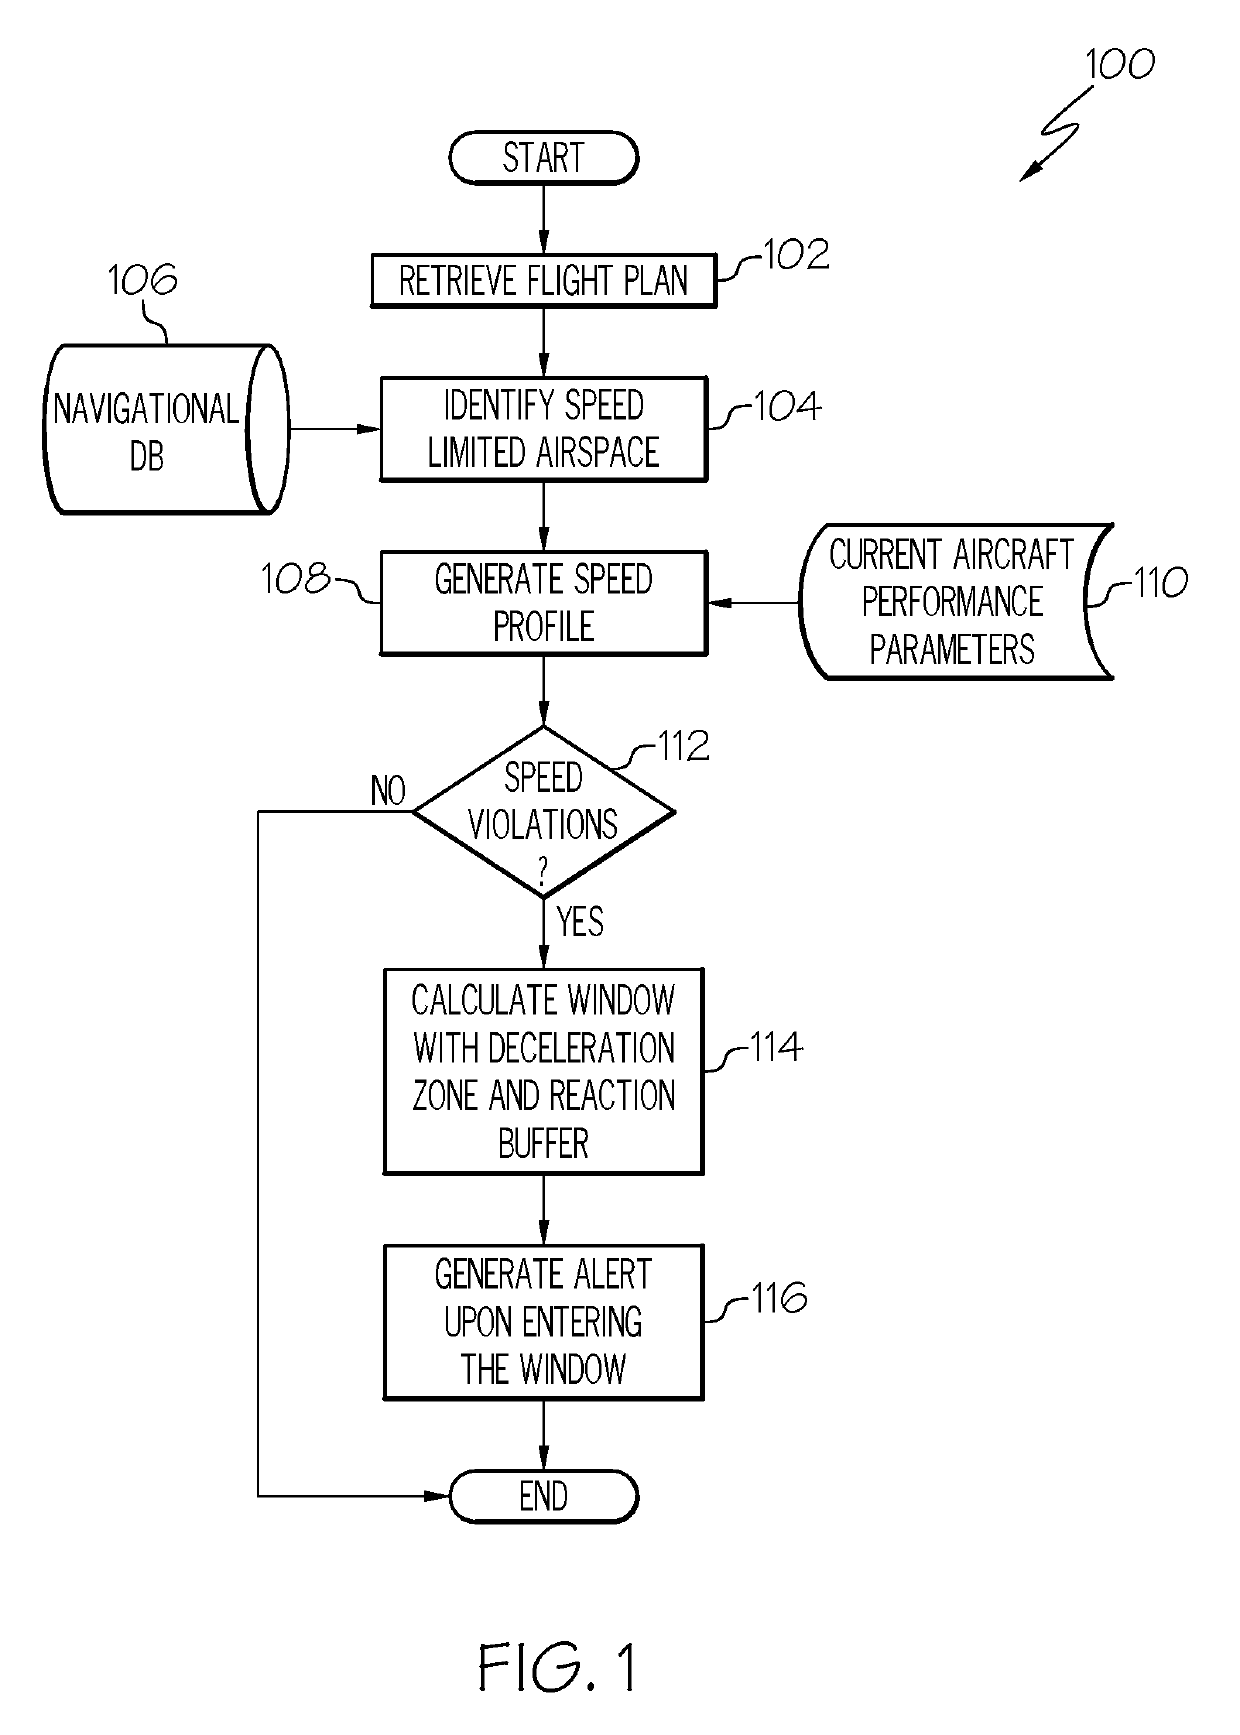 Method and system for generating an alert for an aircraft potentially exceeding speed limits in restricted airspace